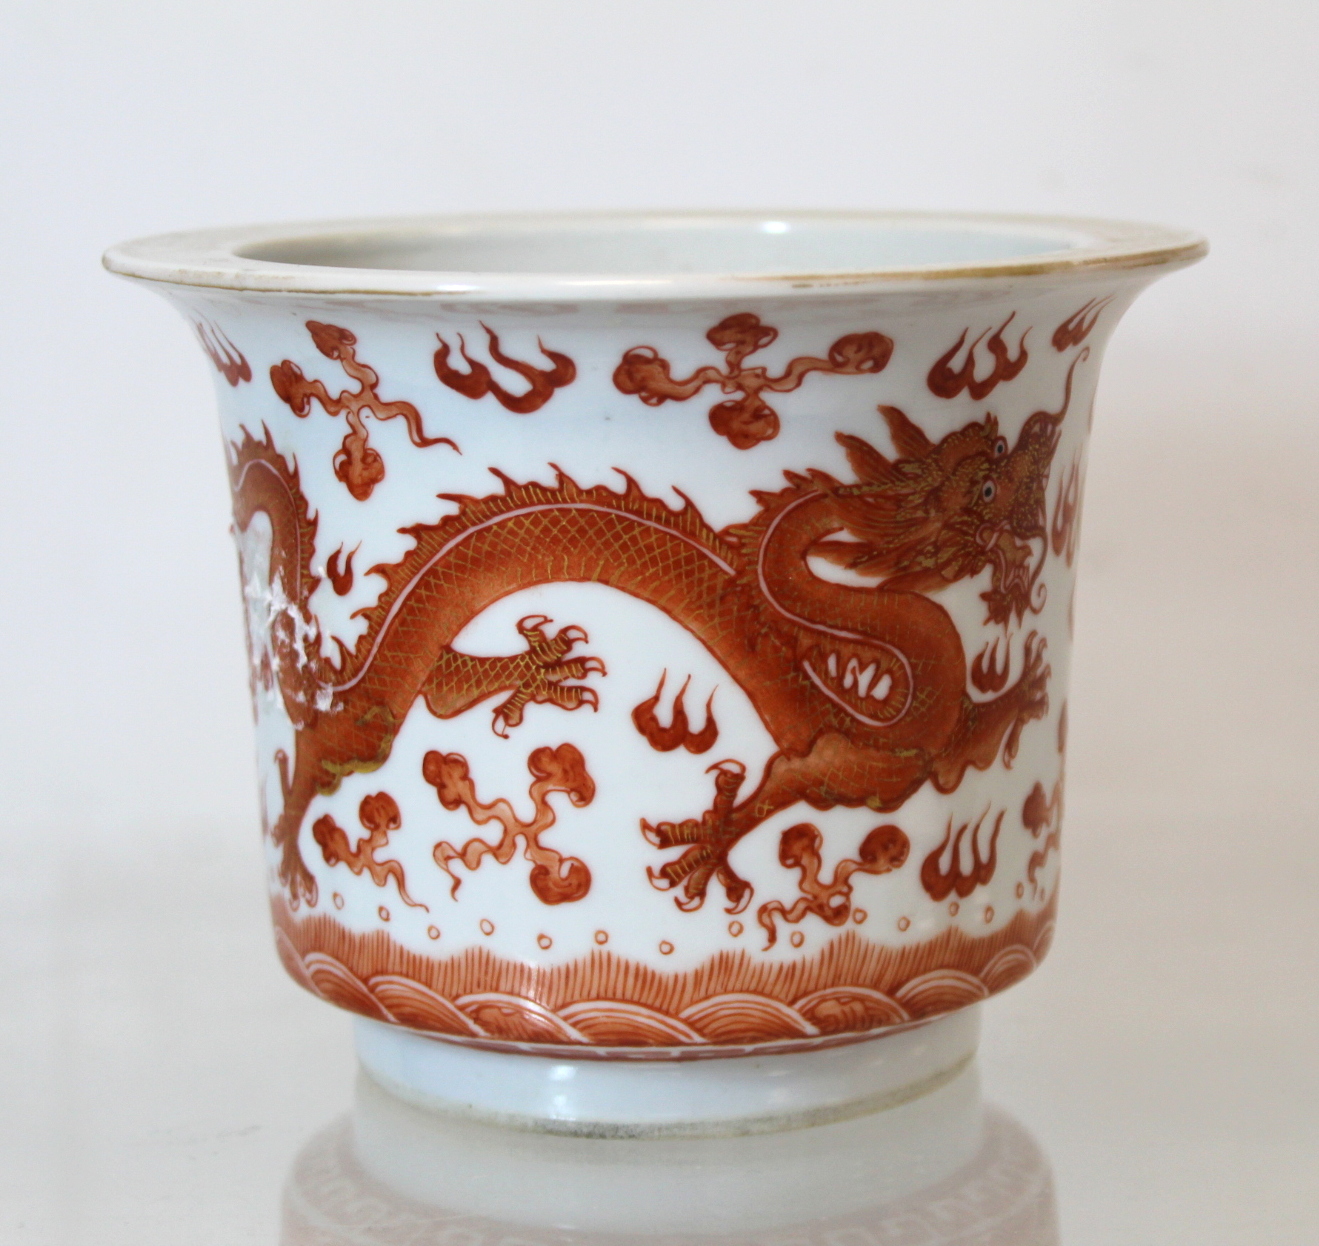 Small Chinese "Rouge de Fer" jardiniere or fern pot, decorated with dragons chasing flaming pearl. - Image 2 of 7